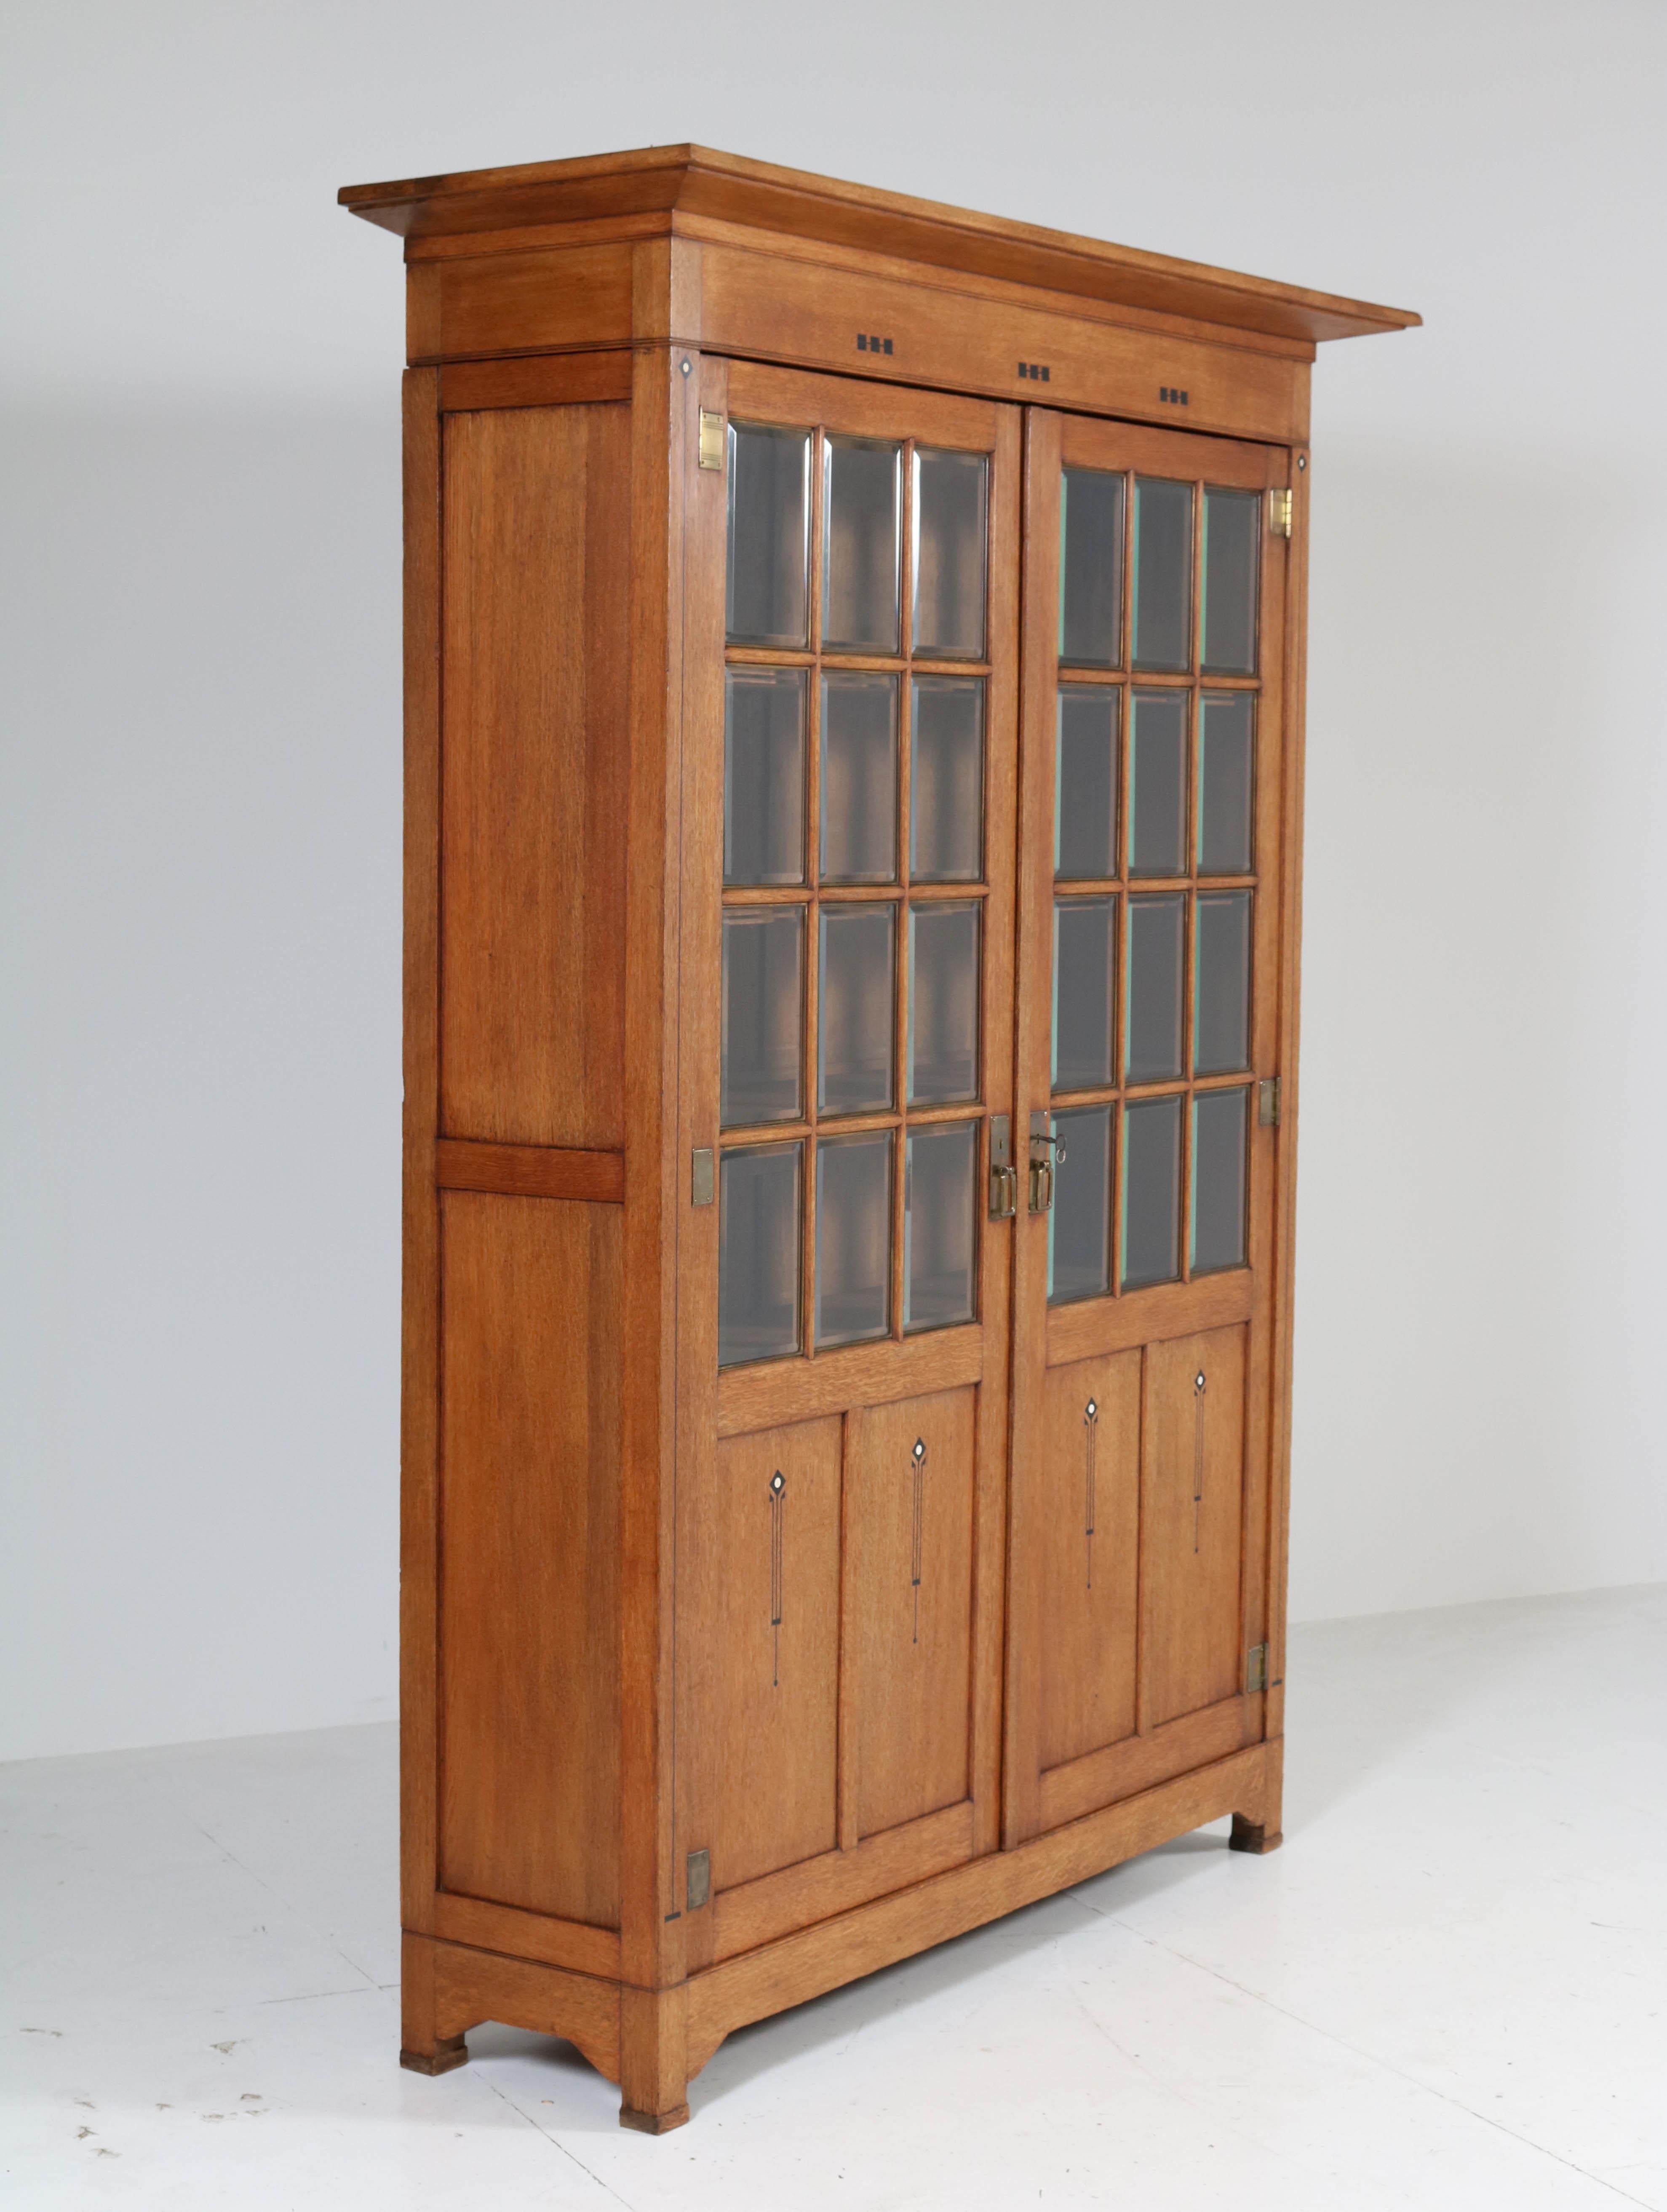 Stunning and rare Arts & Crafts Art Nouveau bookcase.
Striking Dutch design from the 1900s.
Solid oak with original inlay and original beveled glass.
This magnificent piece of furniture can be dismantled for safe transport.
Five original wooden